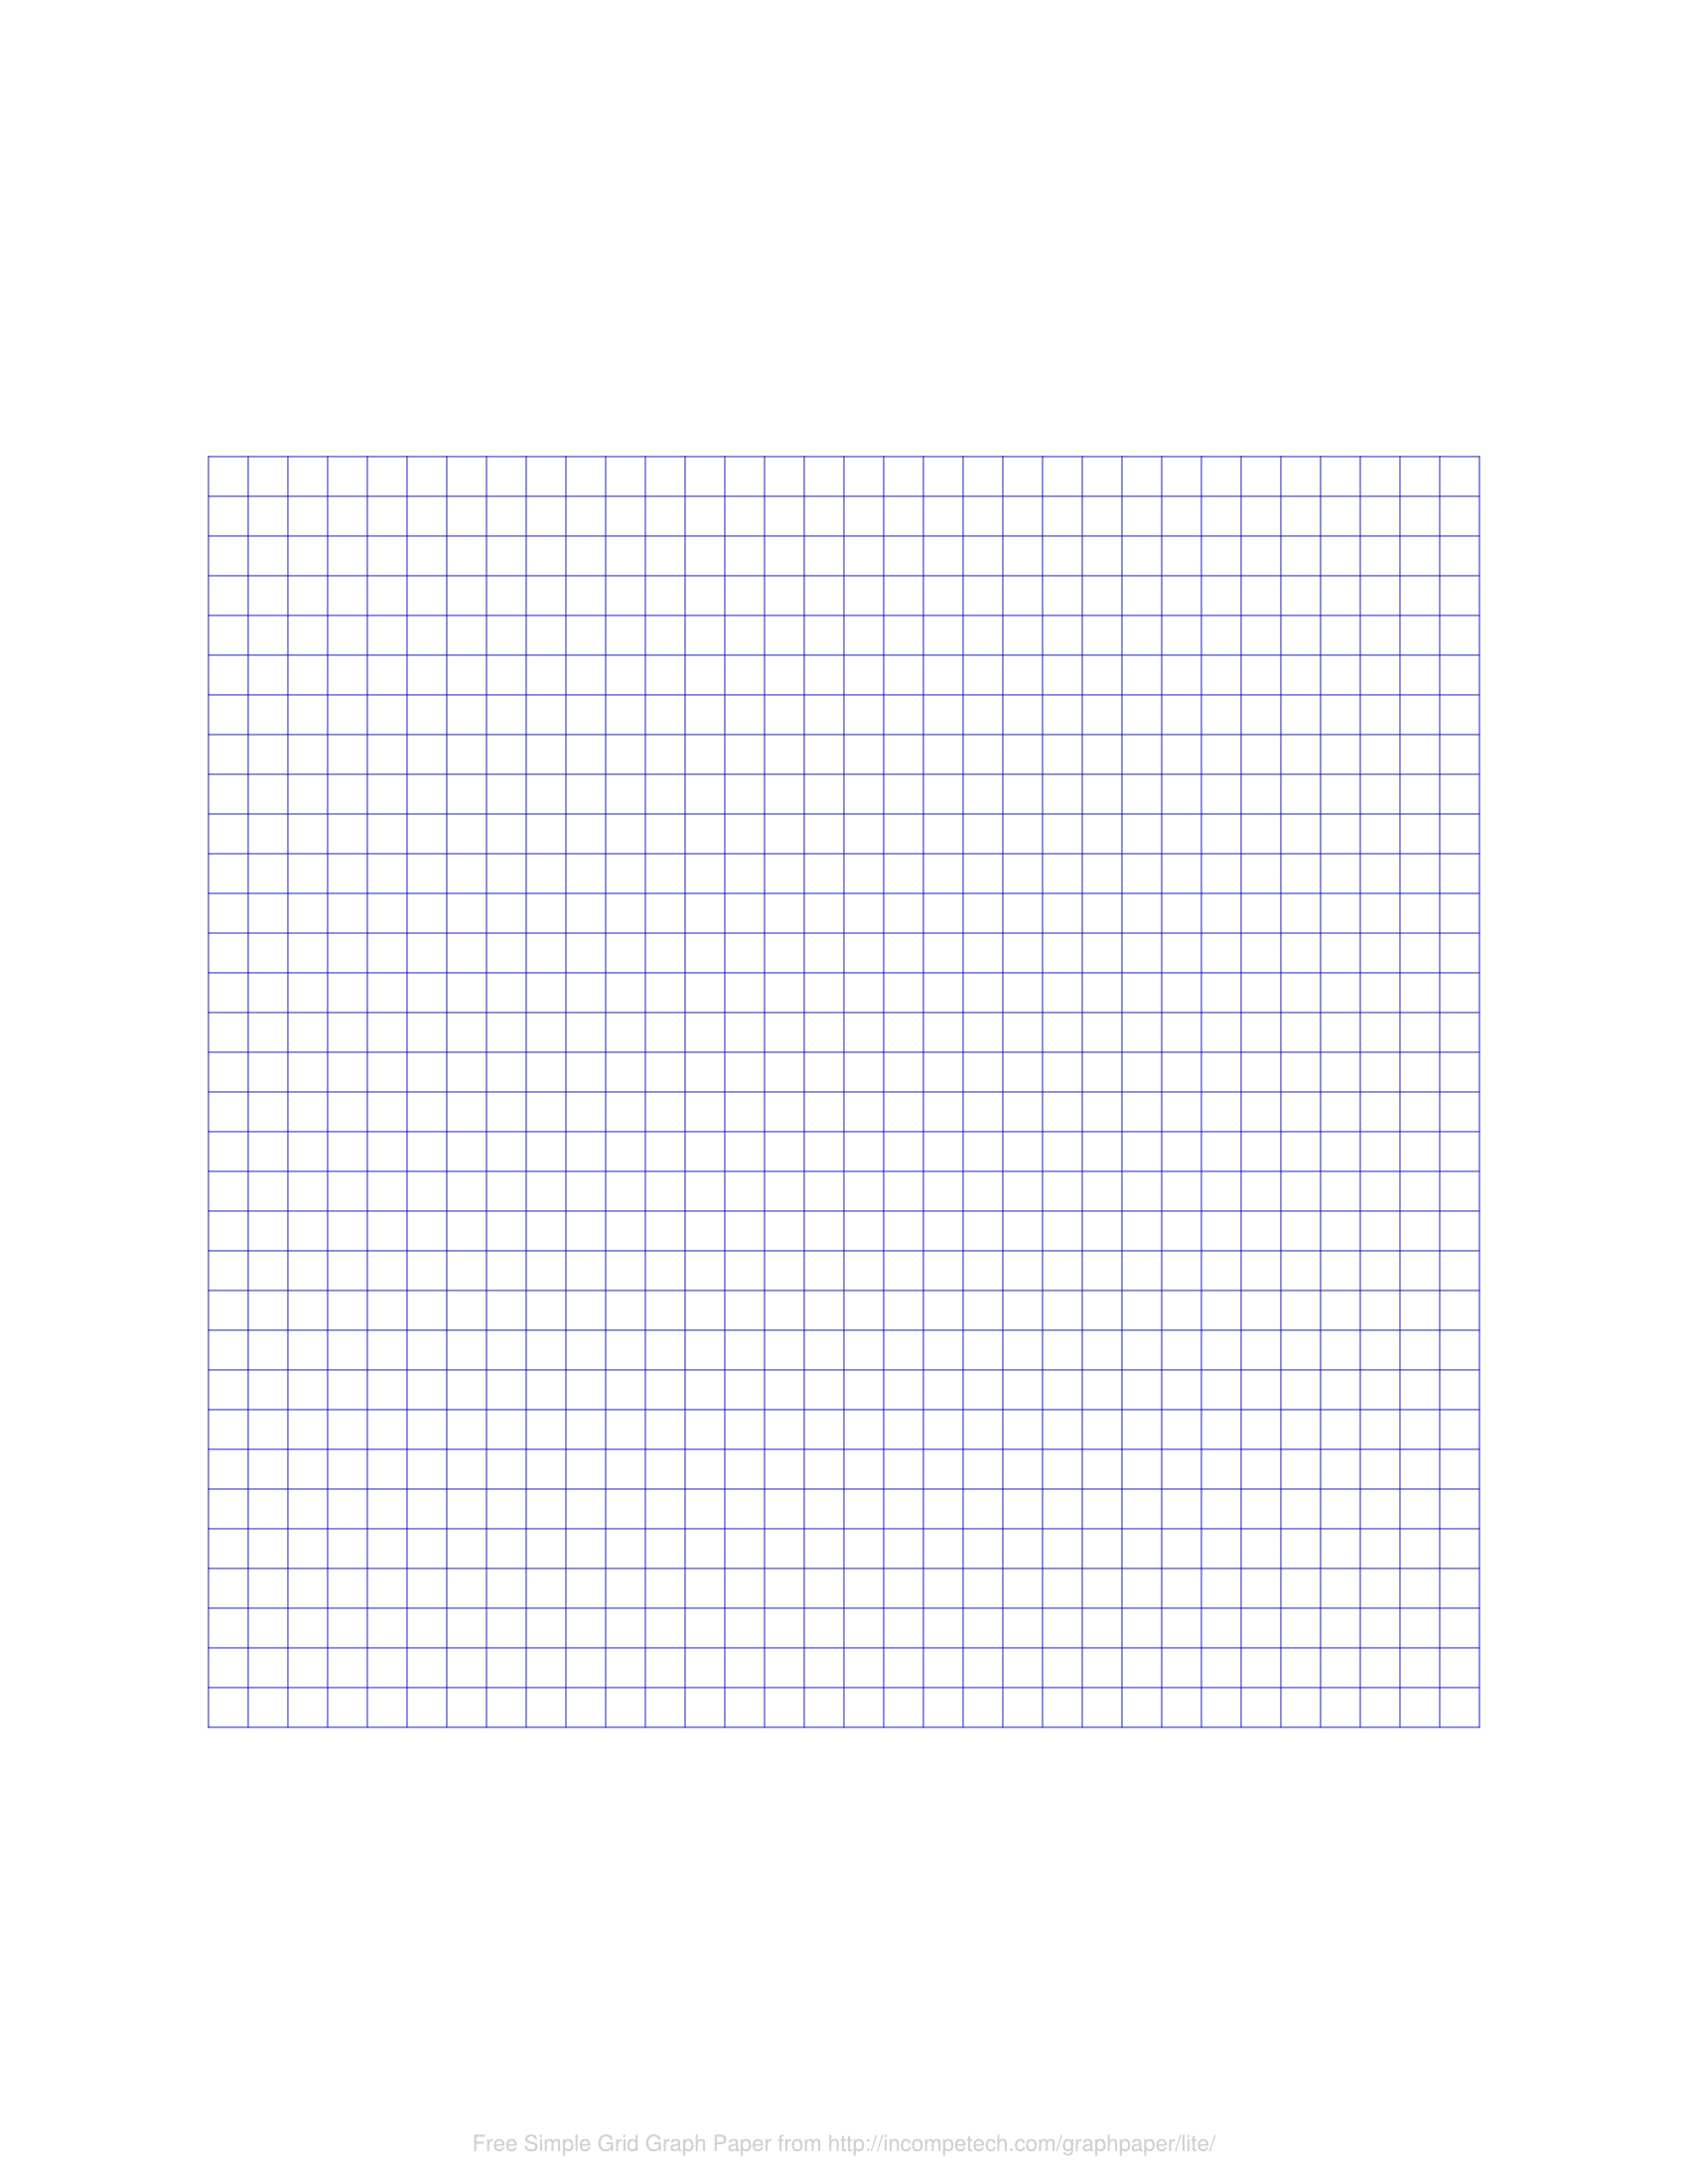 Free Online Graph Paper / Simple Grid For Blank Picture Graph Template